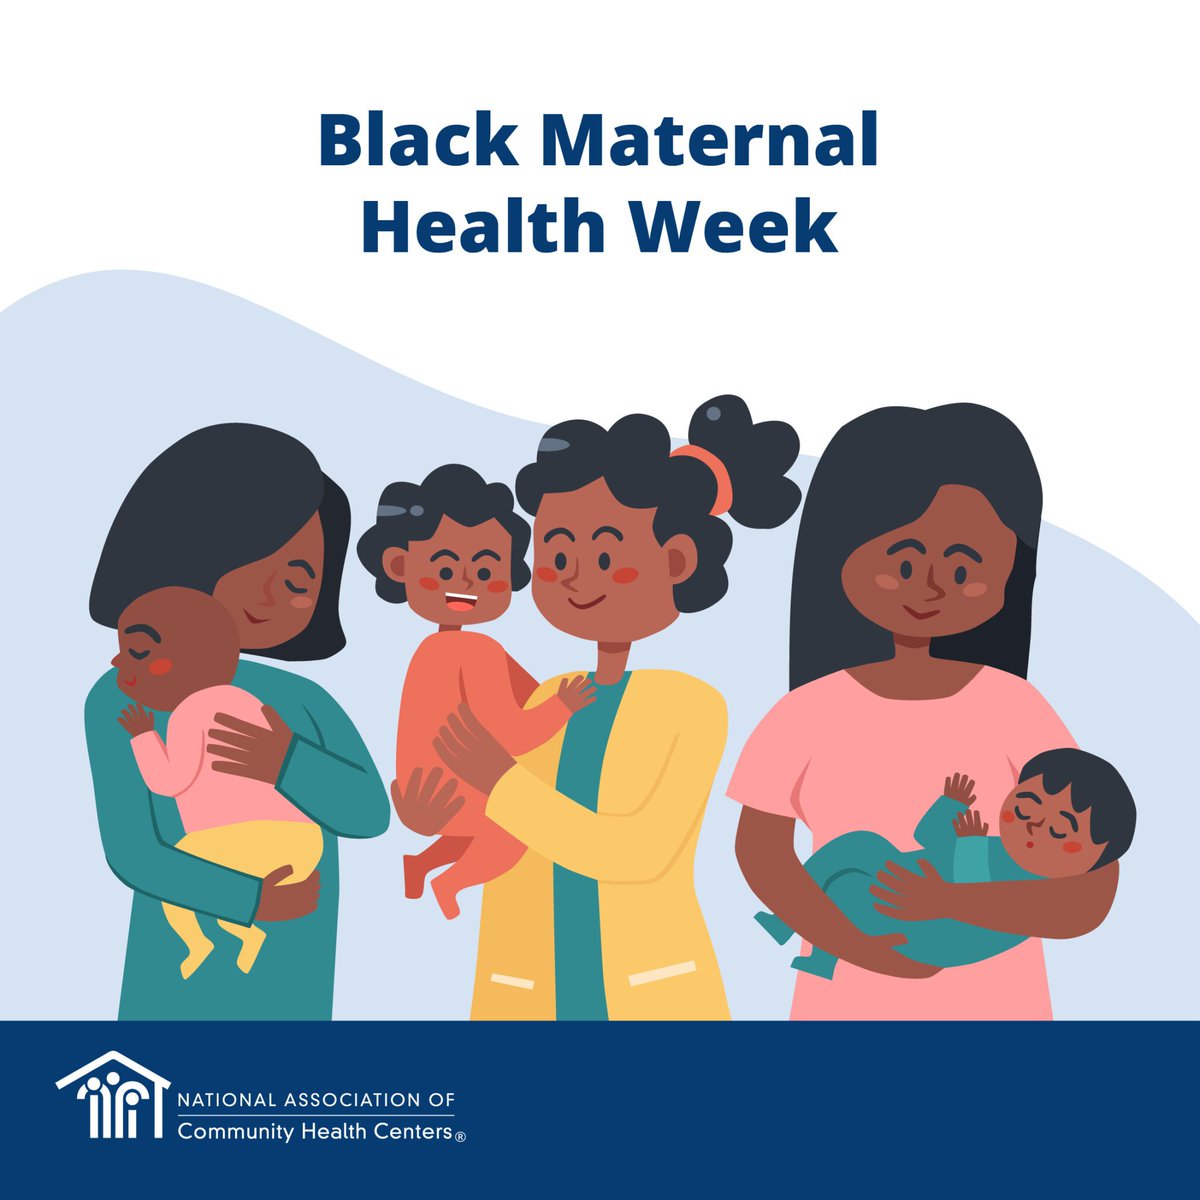 As part of Black Maternal Health Week, we're highlighting how Community Health Centers are working to improve maternal health outcomes. One result? Health center patients have LOWER rates of low-birth weight babies than the national average. #BMHW24 #ValueCHCs